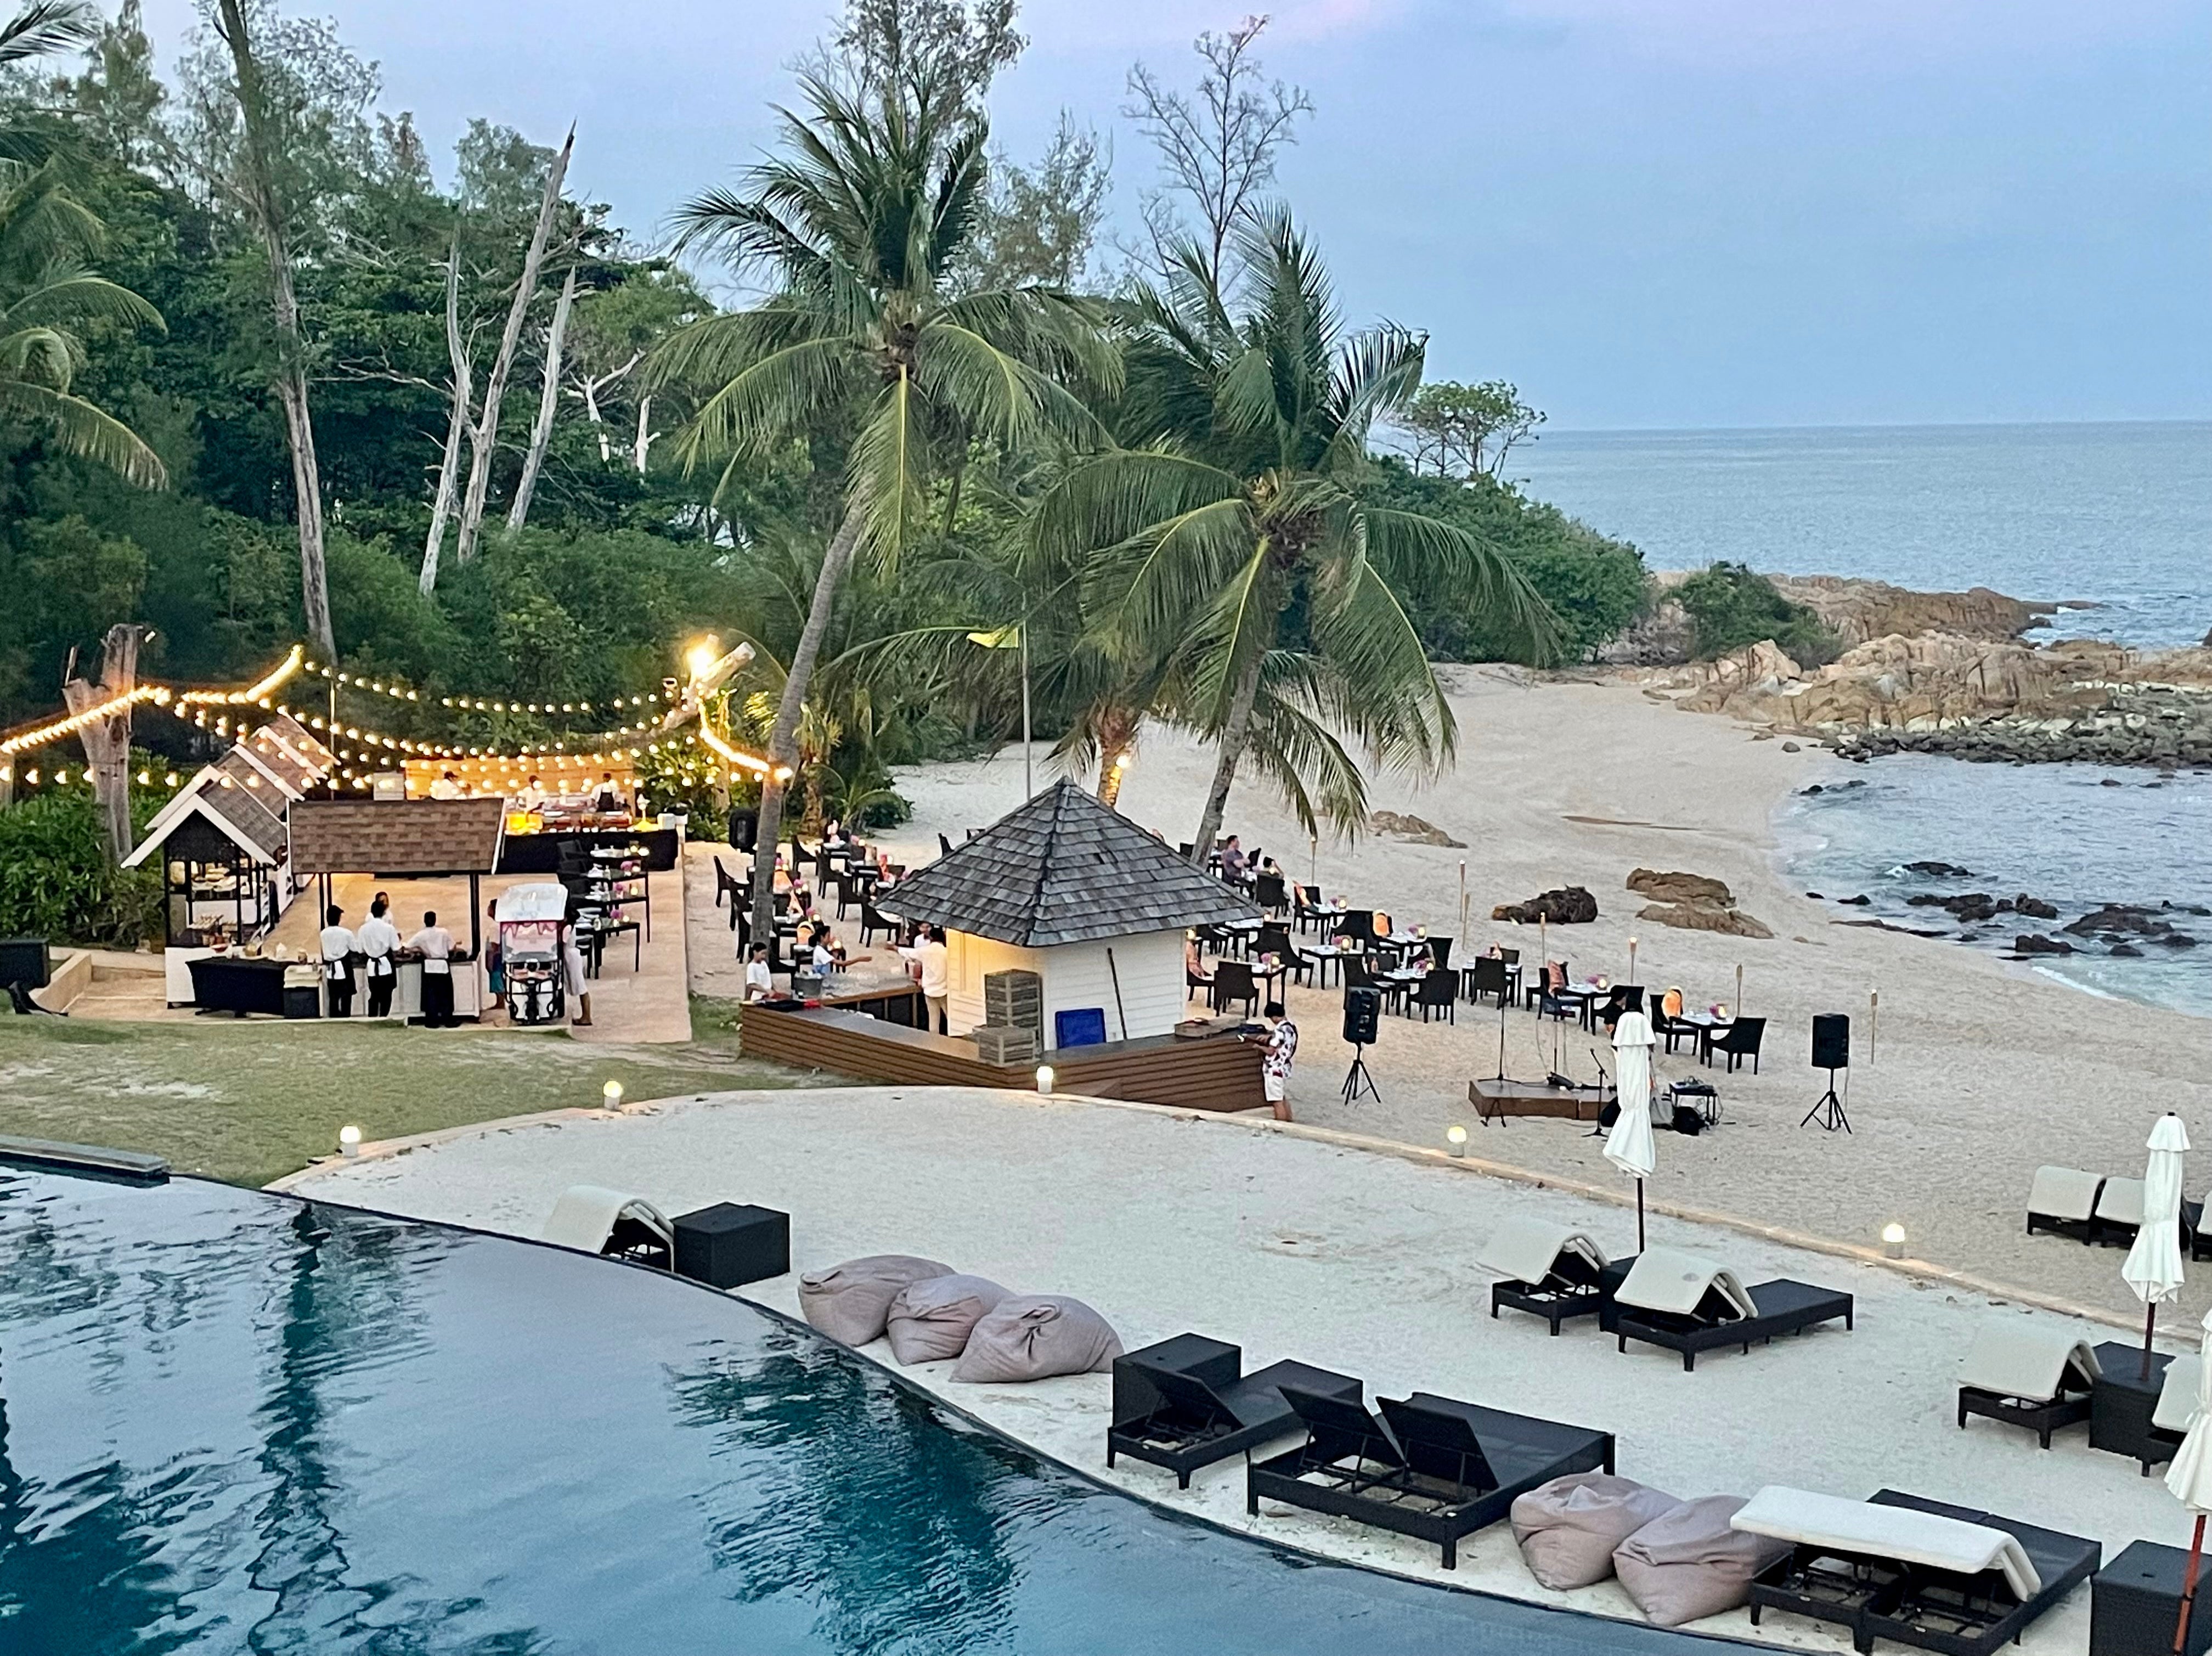 Bliss: the infinity pool and beach bar on the Ritz-Carlton’s private cove on Koh Samui